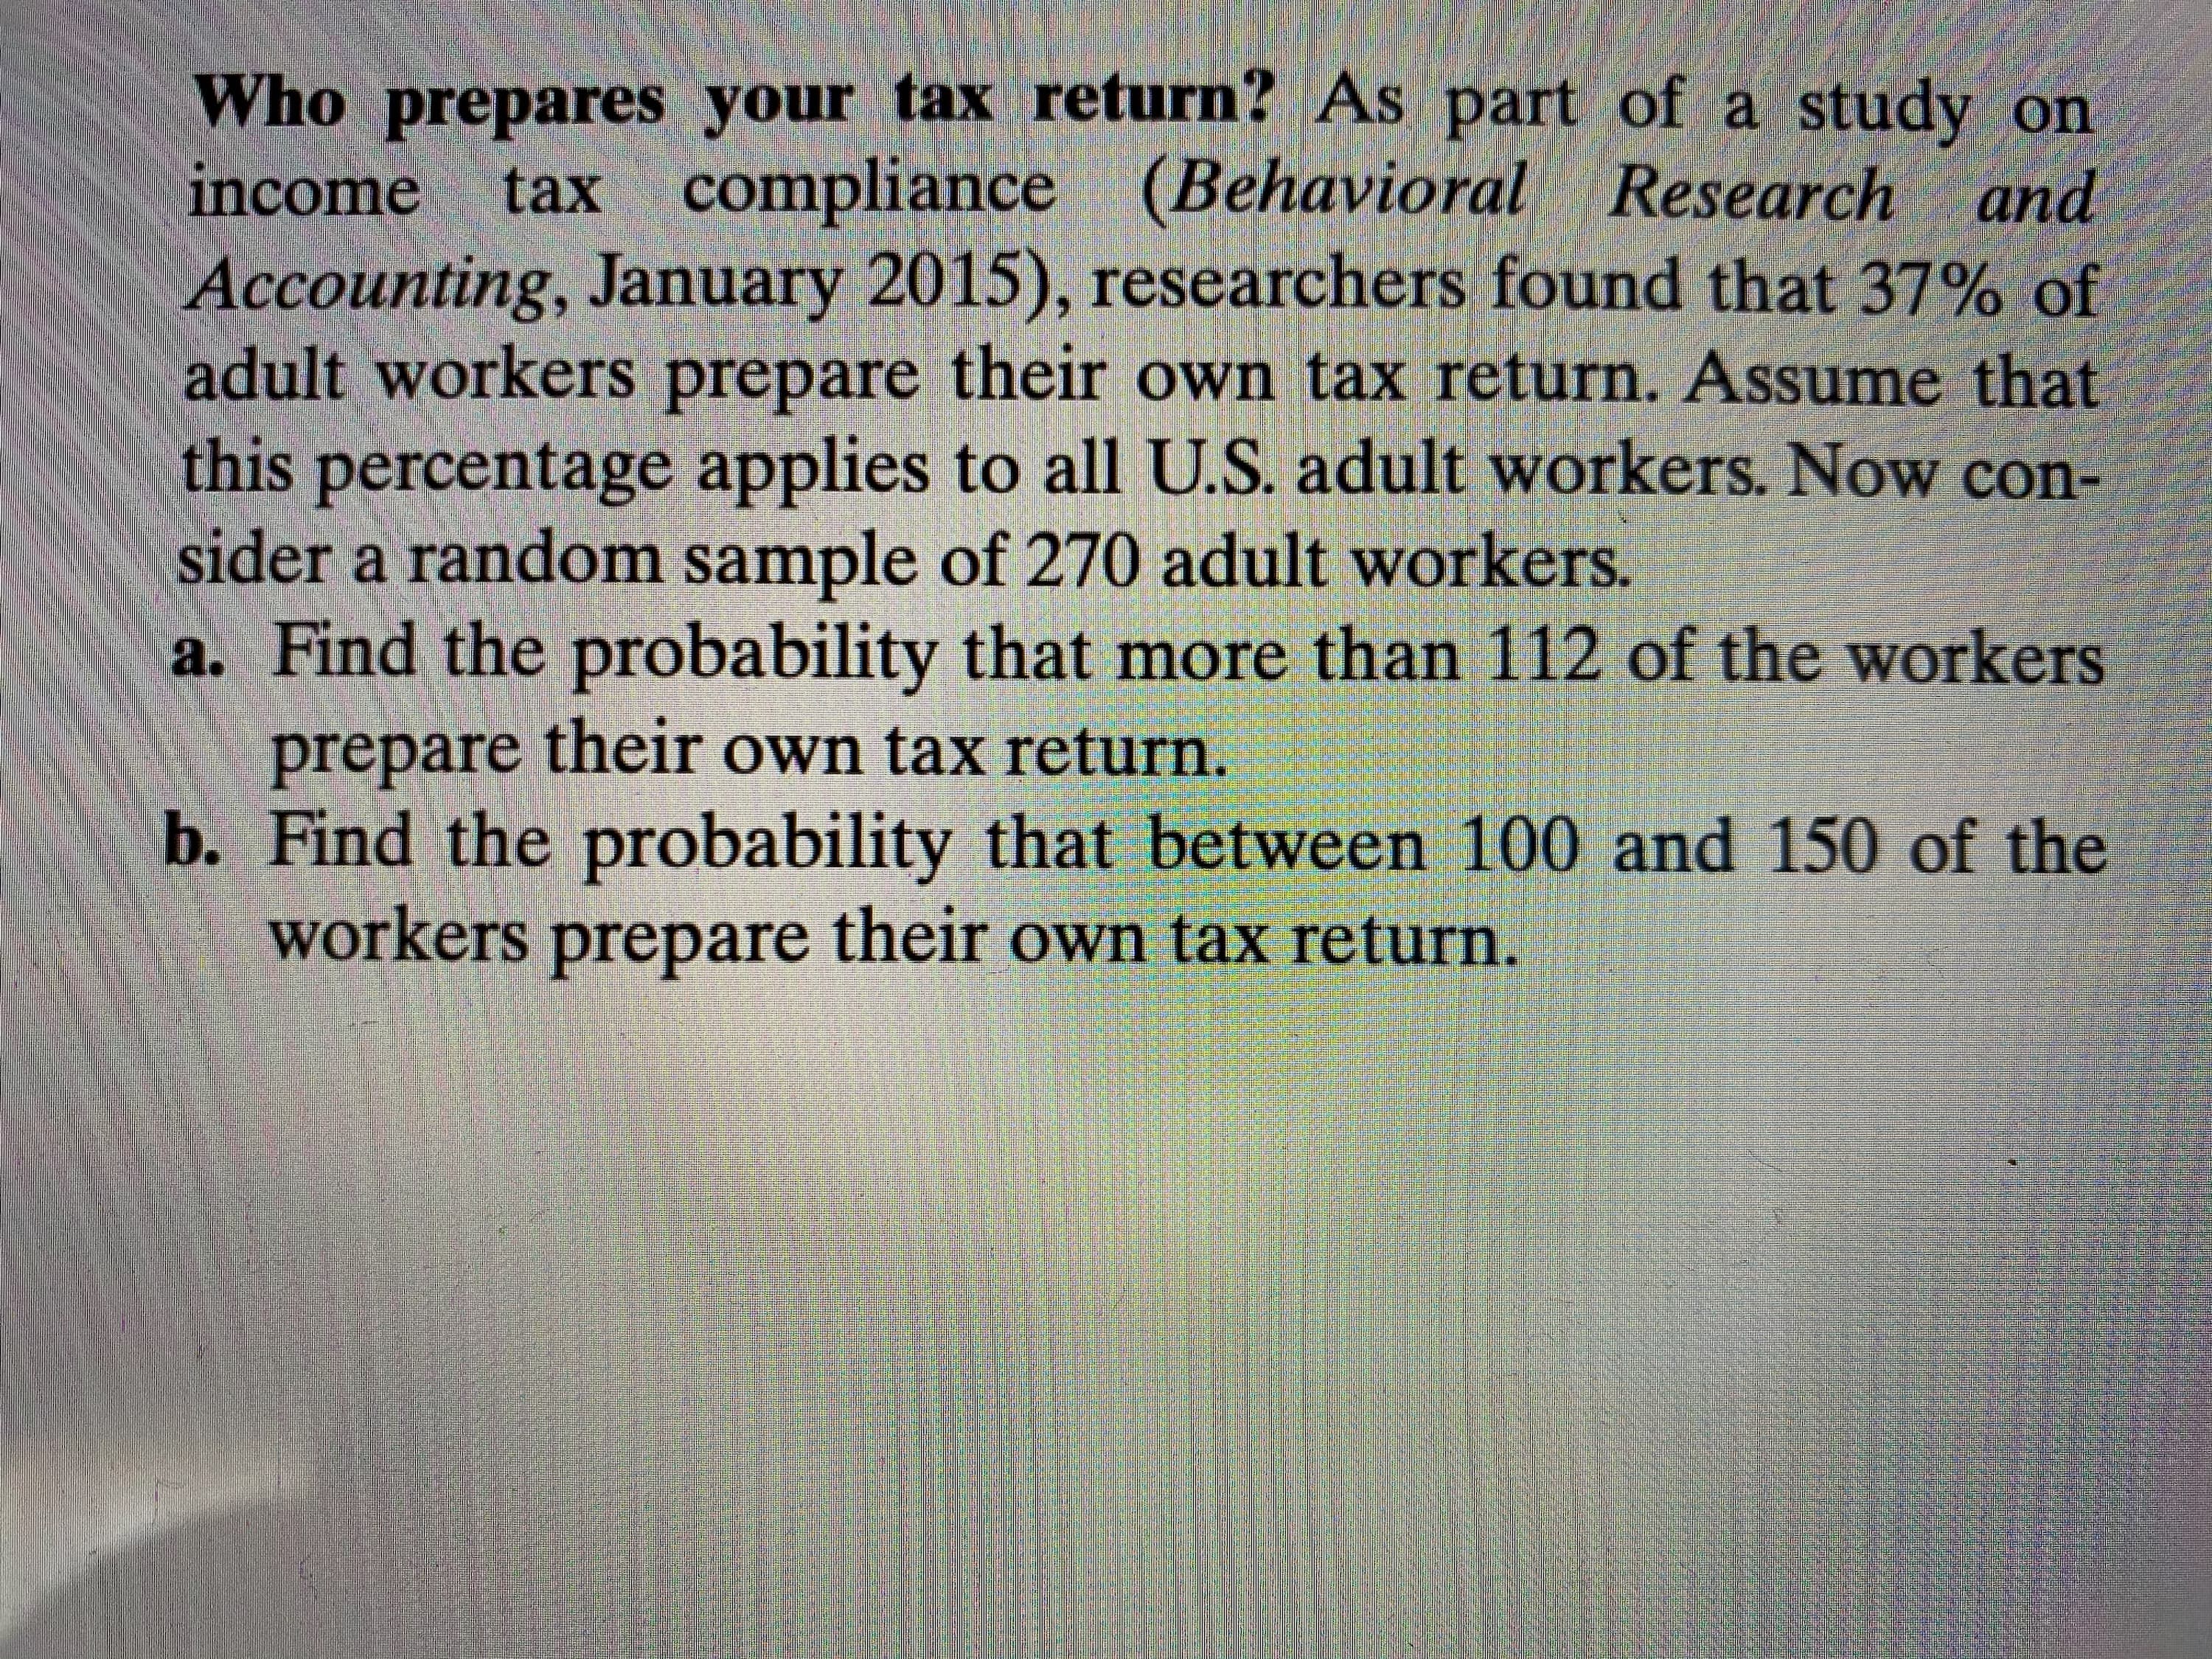 Who prepares your tax return? As part of a study on
income
tax compliance (Behavioral Research and
Accounting, January 2015), researchers found that 37% of
adult workers prepare their own tax return. Assume that
this percentage applies to all U.S. adult workers. Now con-
sider a random sample of 270 adult workers.
a. Find the probability that more than 112 of the workers
prepare own tax return.
their
b. Find the probability that between 100 and 150 of the
workers their own tax return.
prepare
